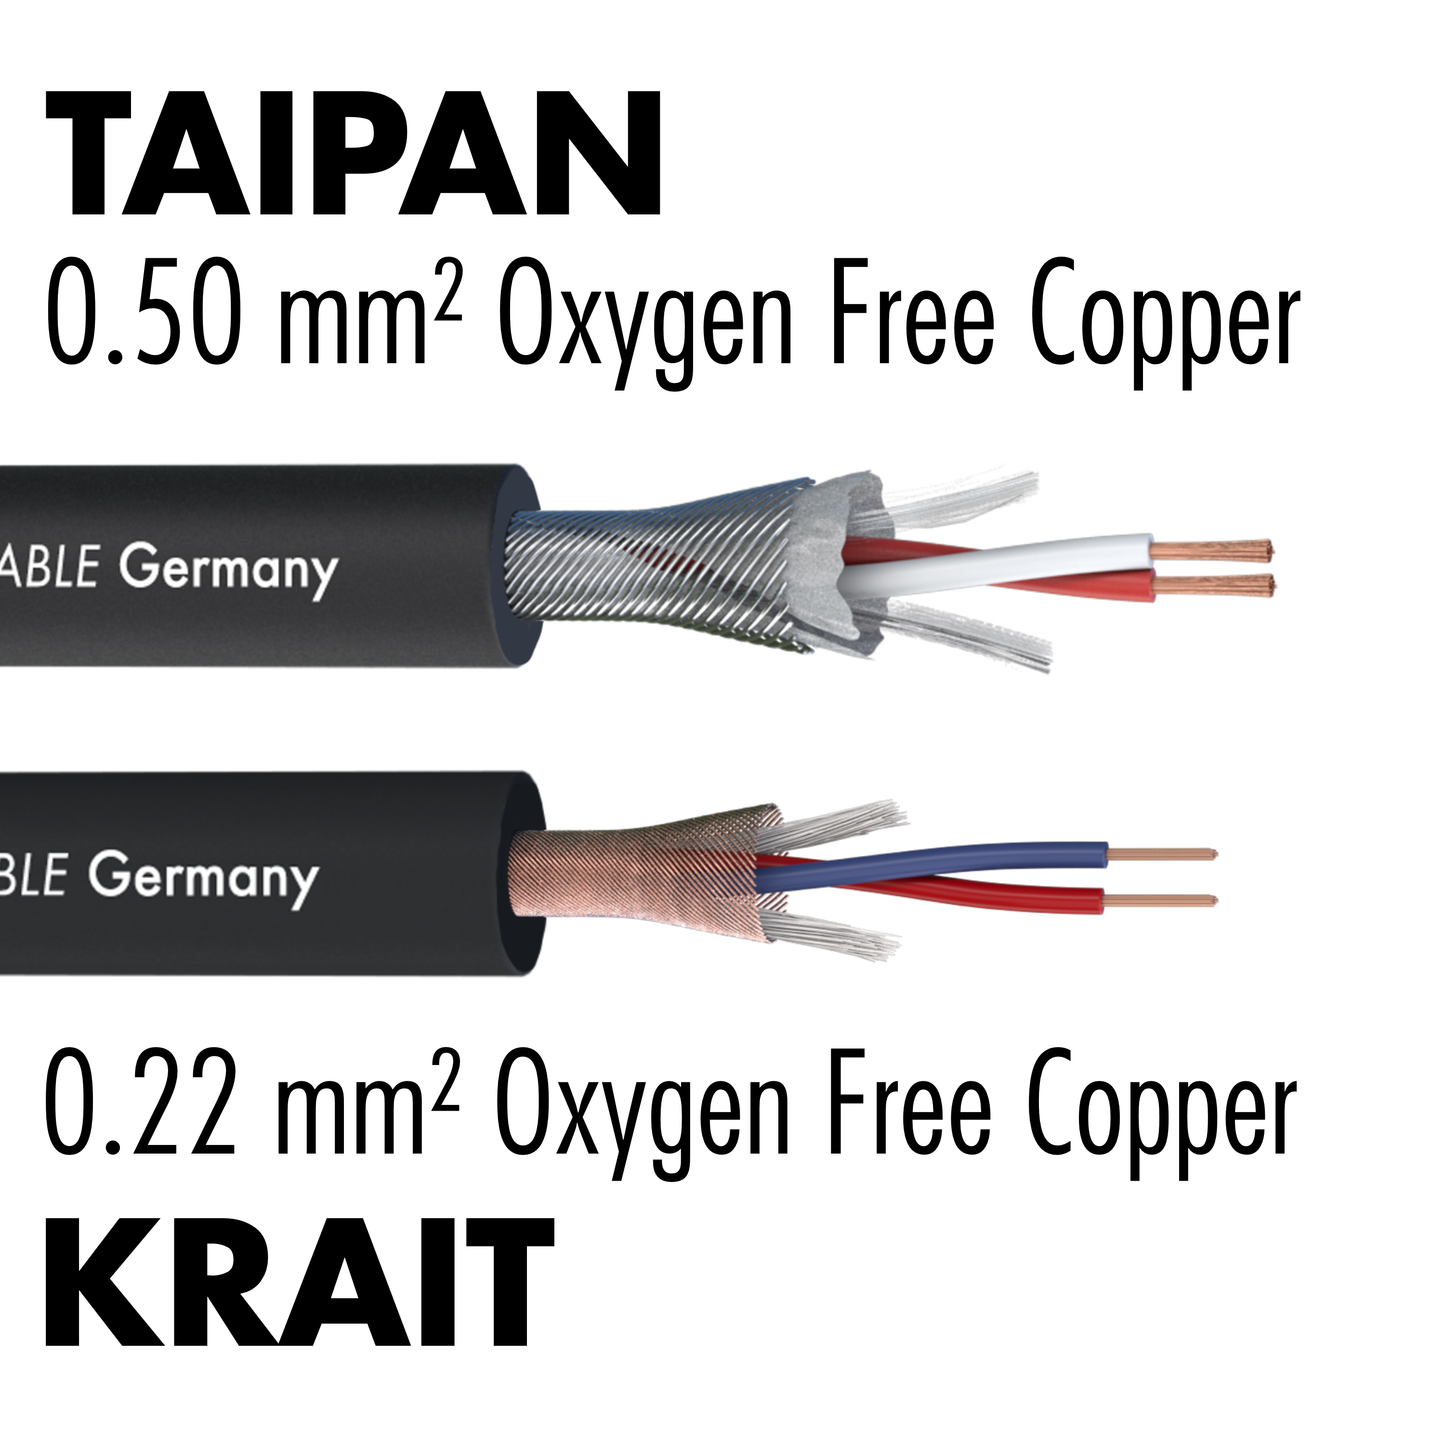 Pair of Taipan XLR Cables (9 in - 30 ft)